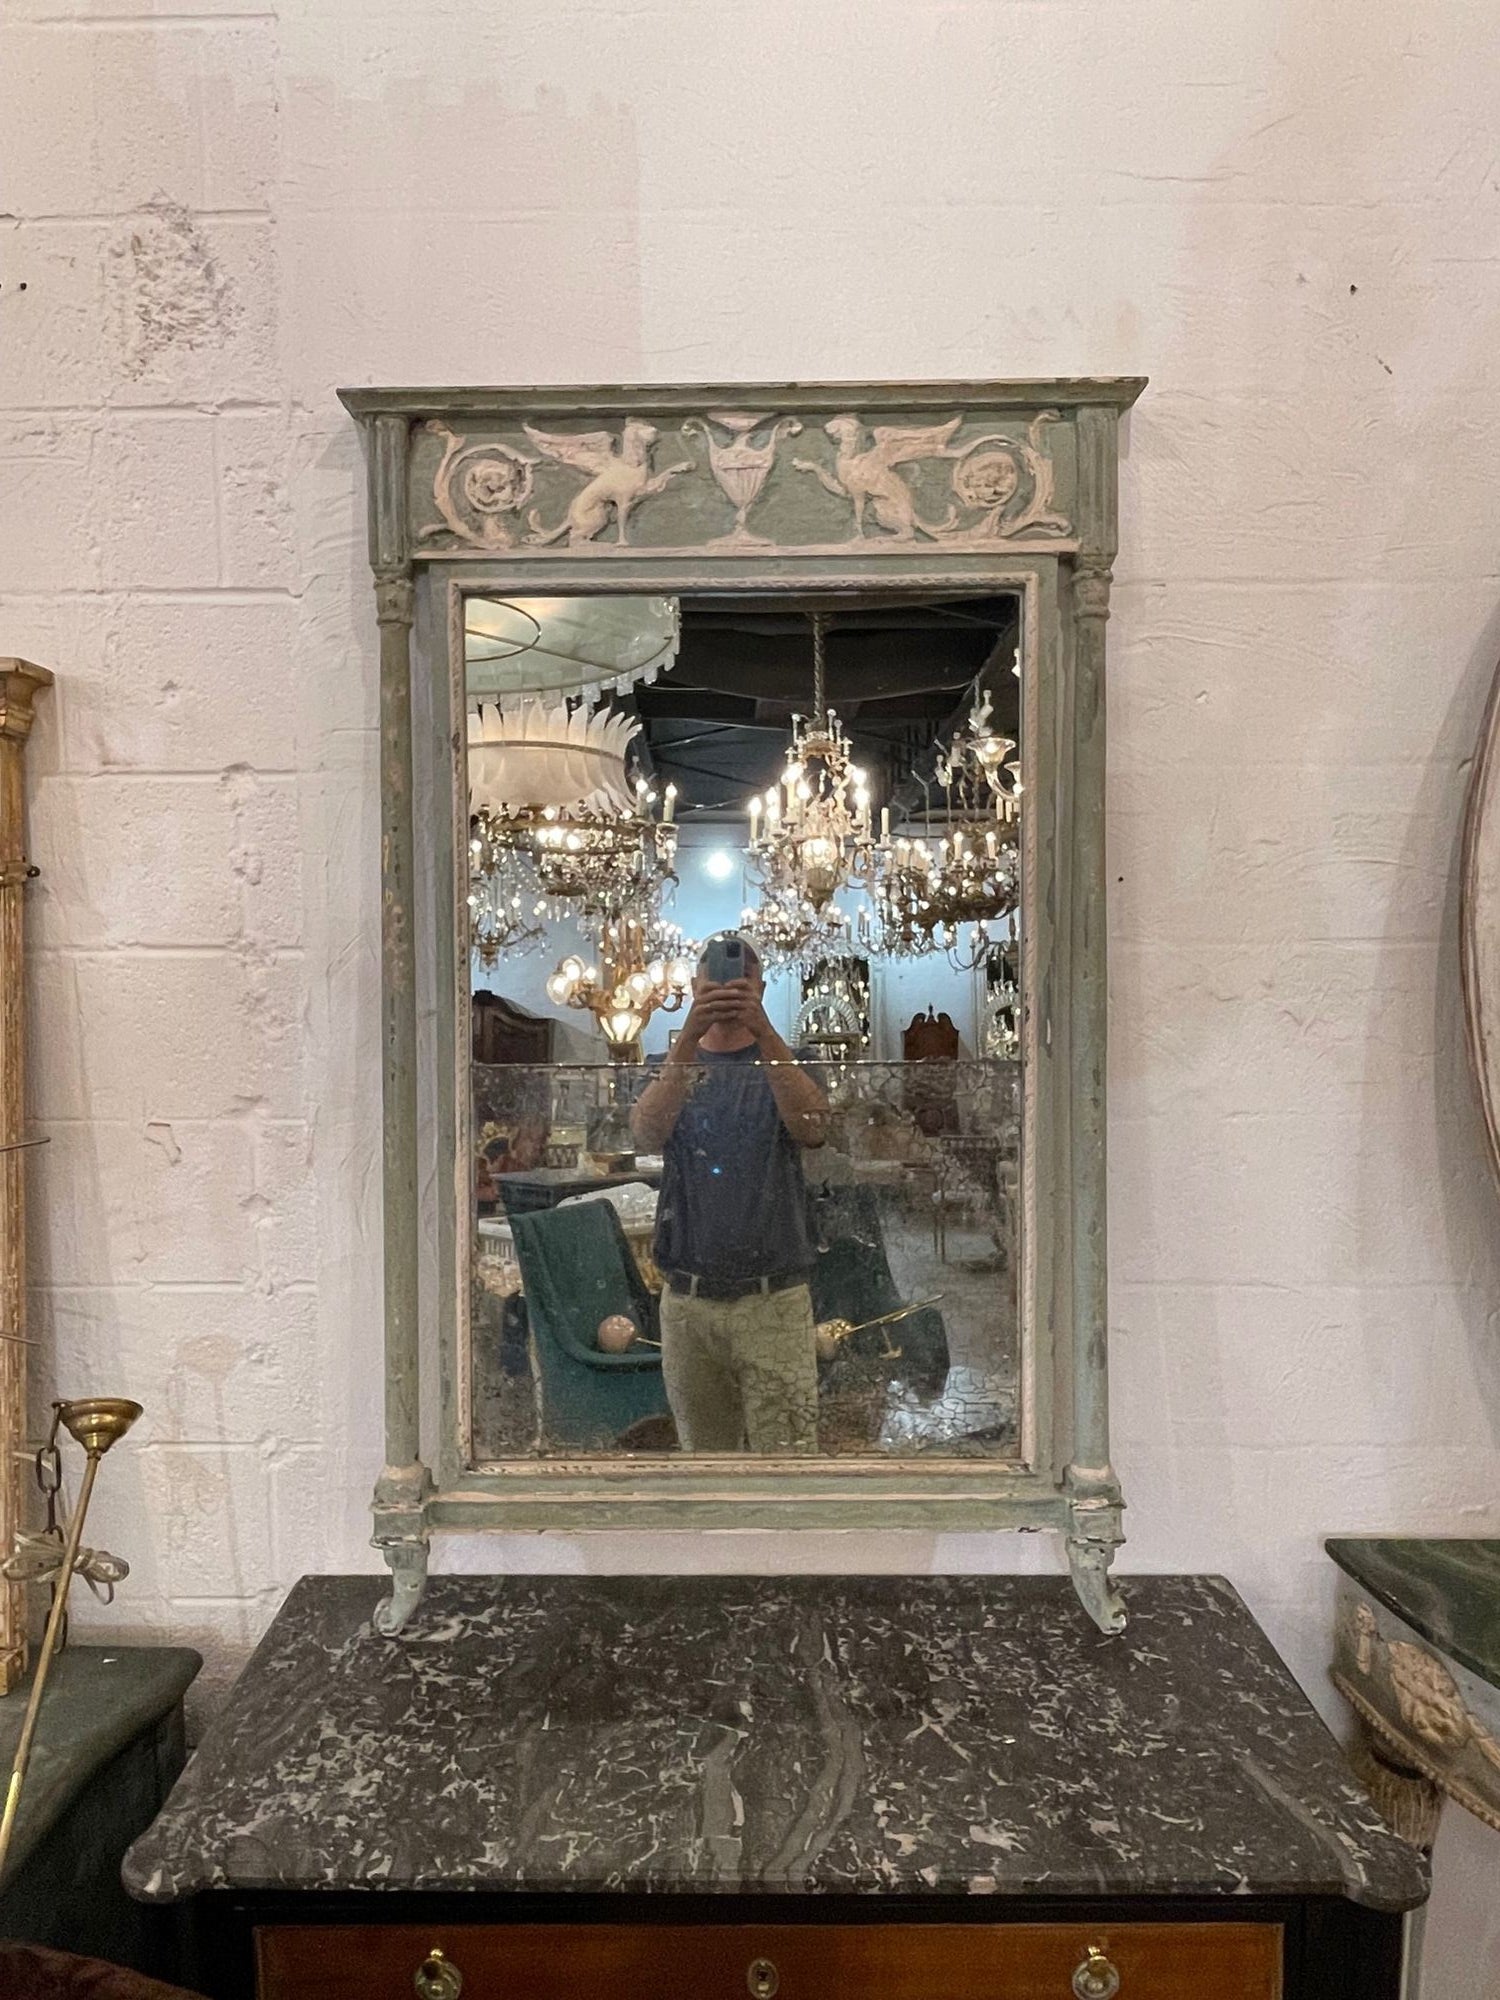 Very fine 18th century Italian neo-classical carved and painted mirror. Lovely patina and carvings on this piece. The mirror also has 2 panels of original glass. So pretty!!